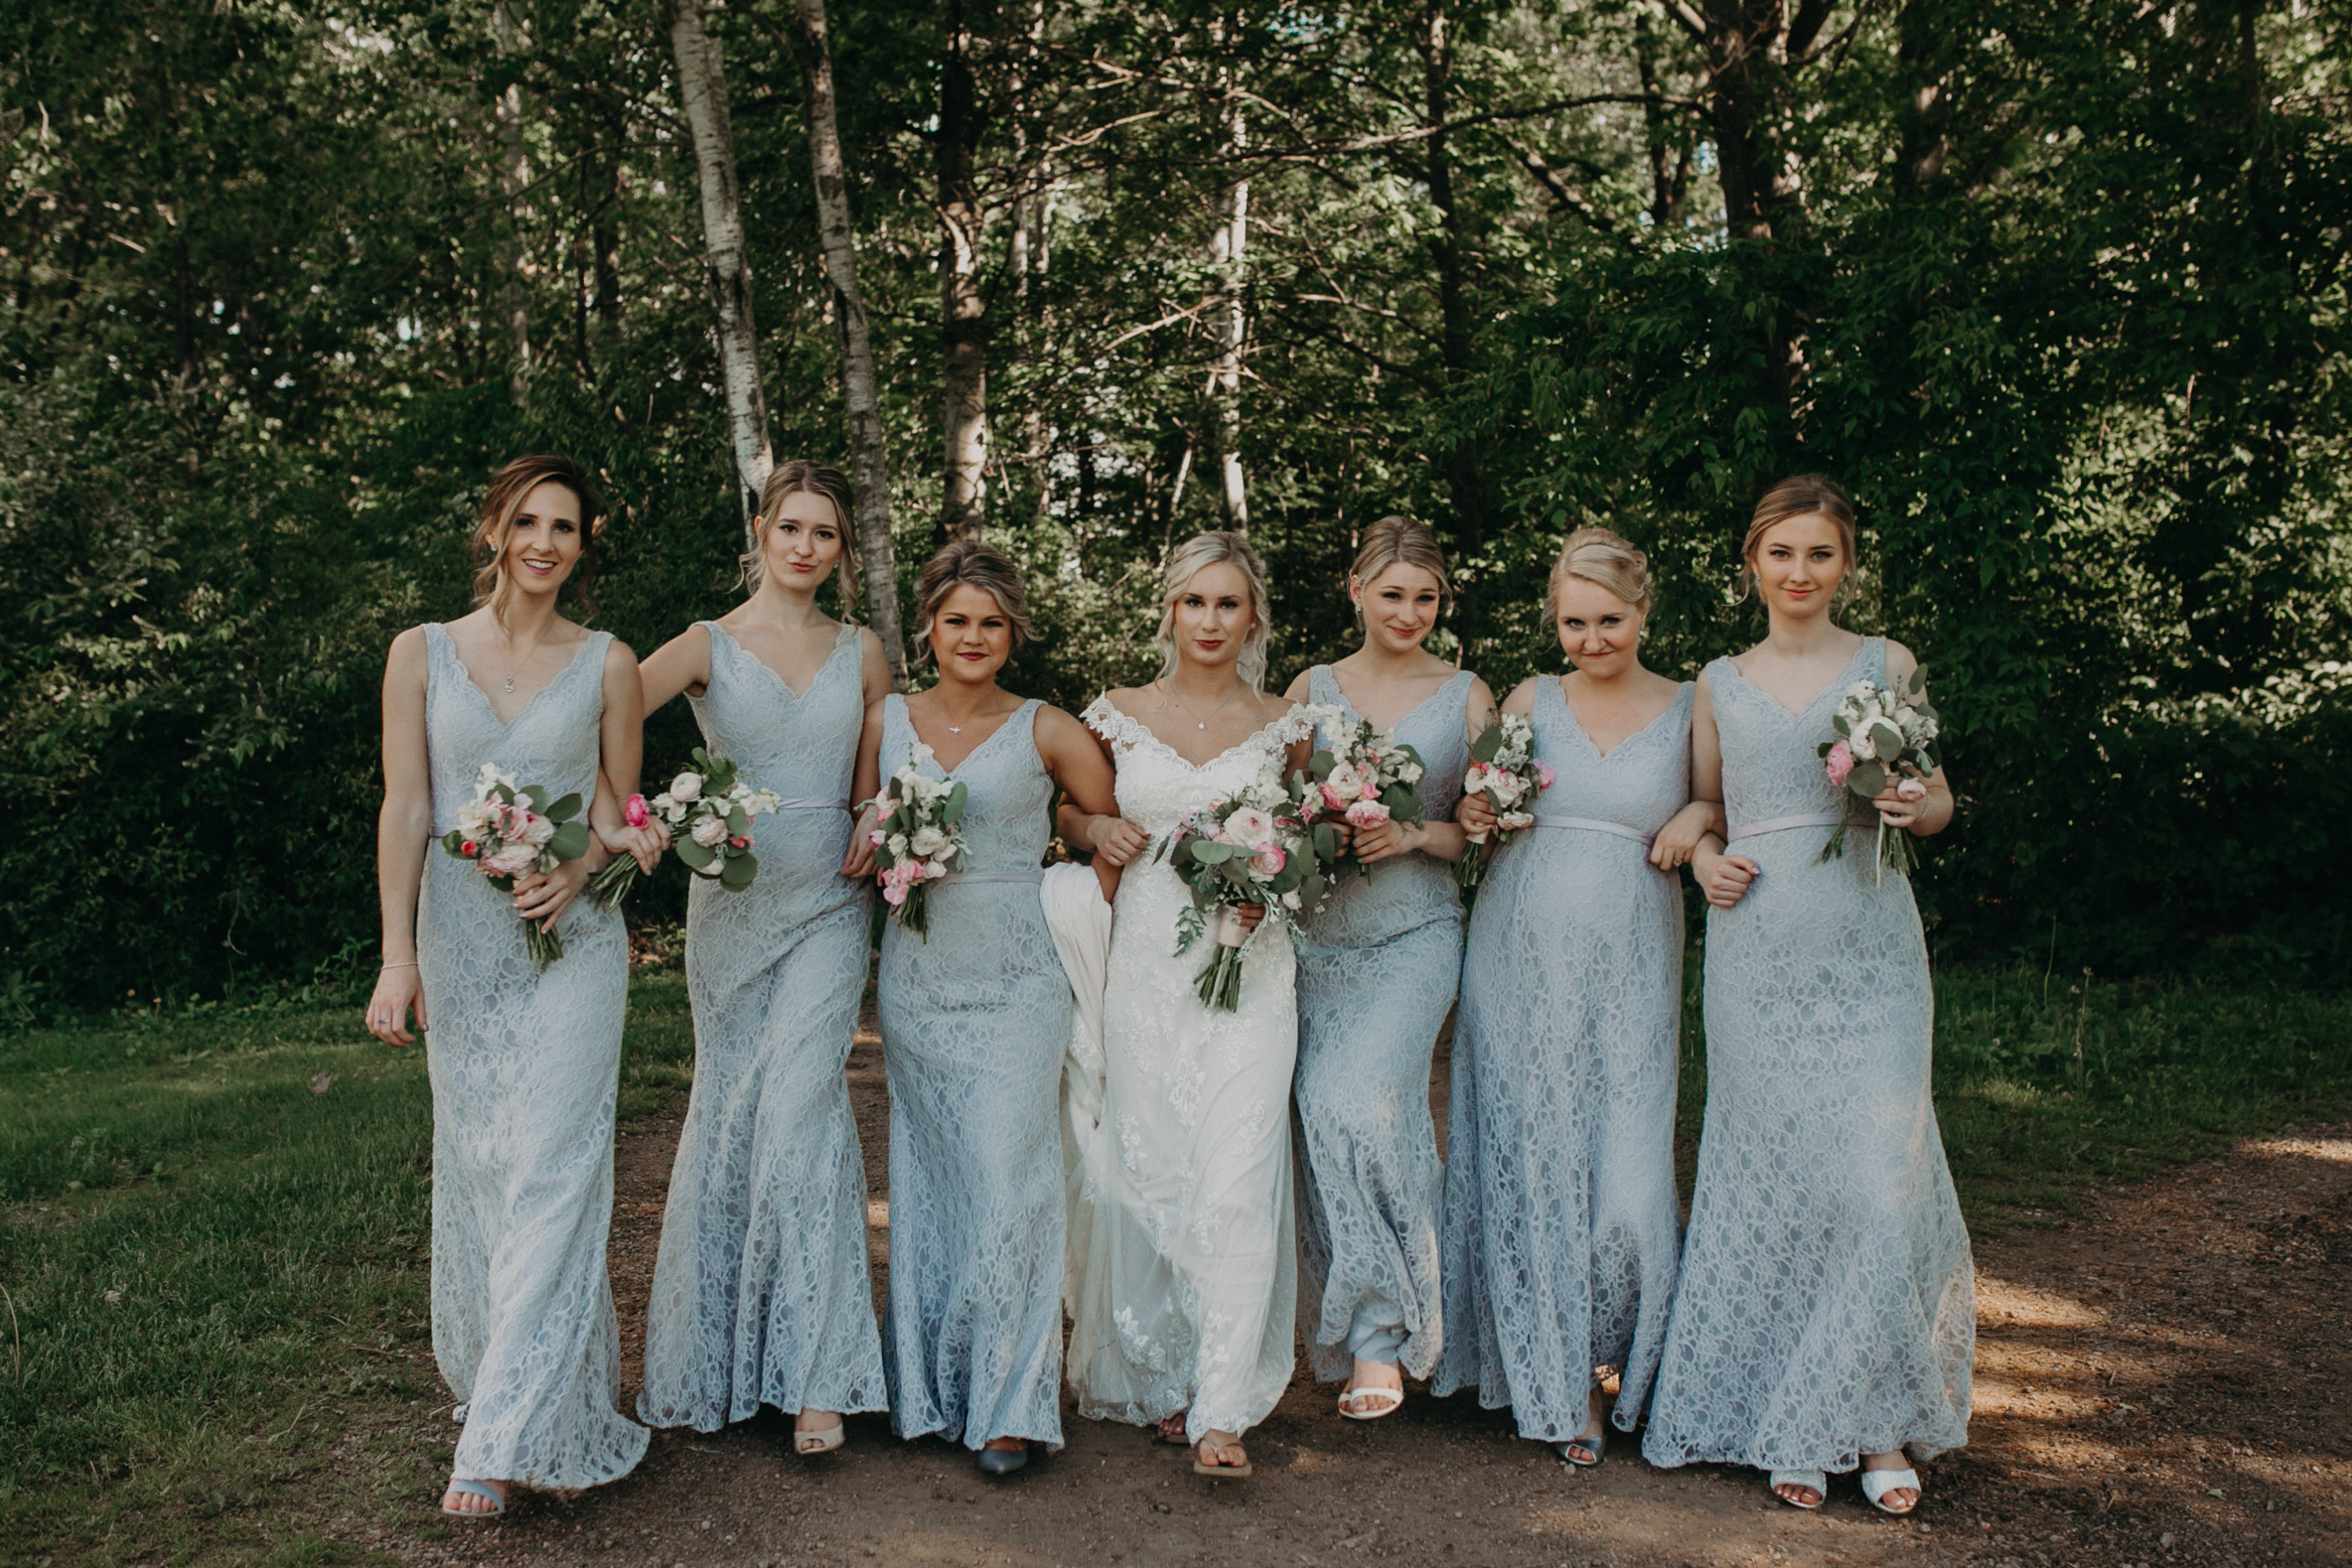  RiverEdge Golf Club wedding with beautiful girl gang in the wedding party 